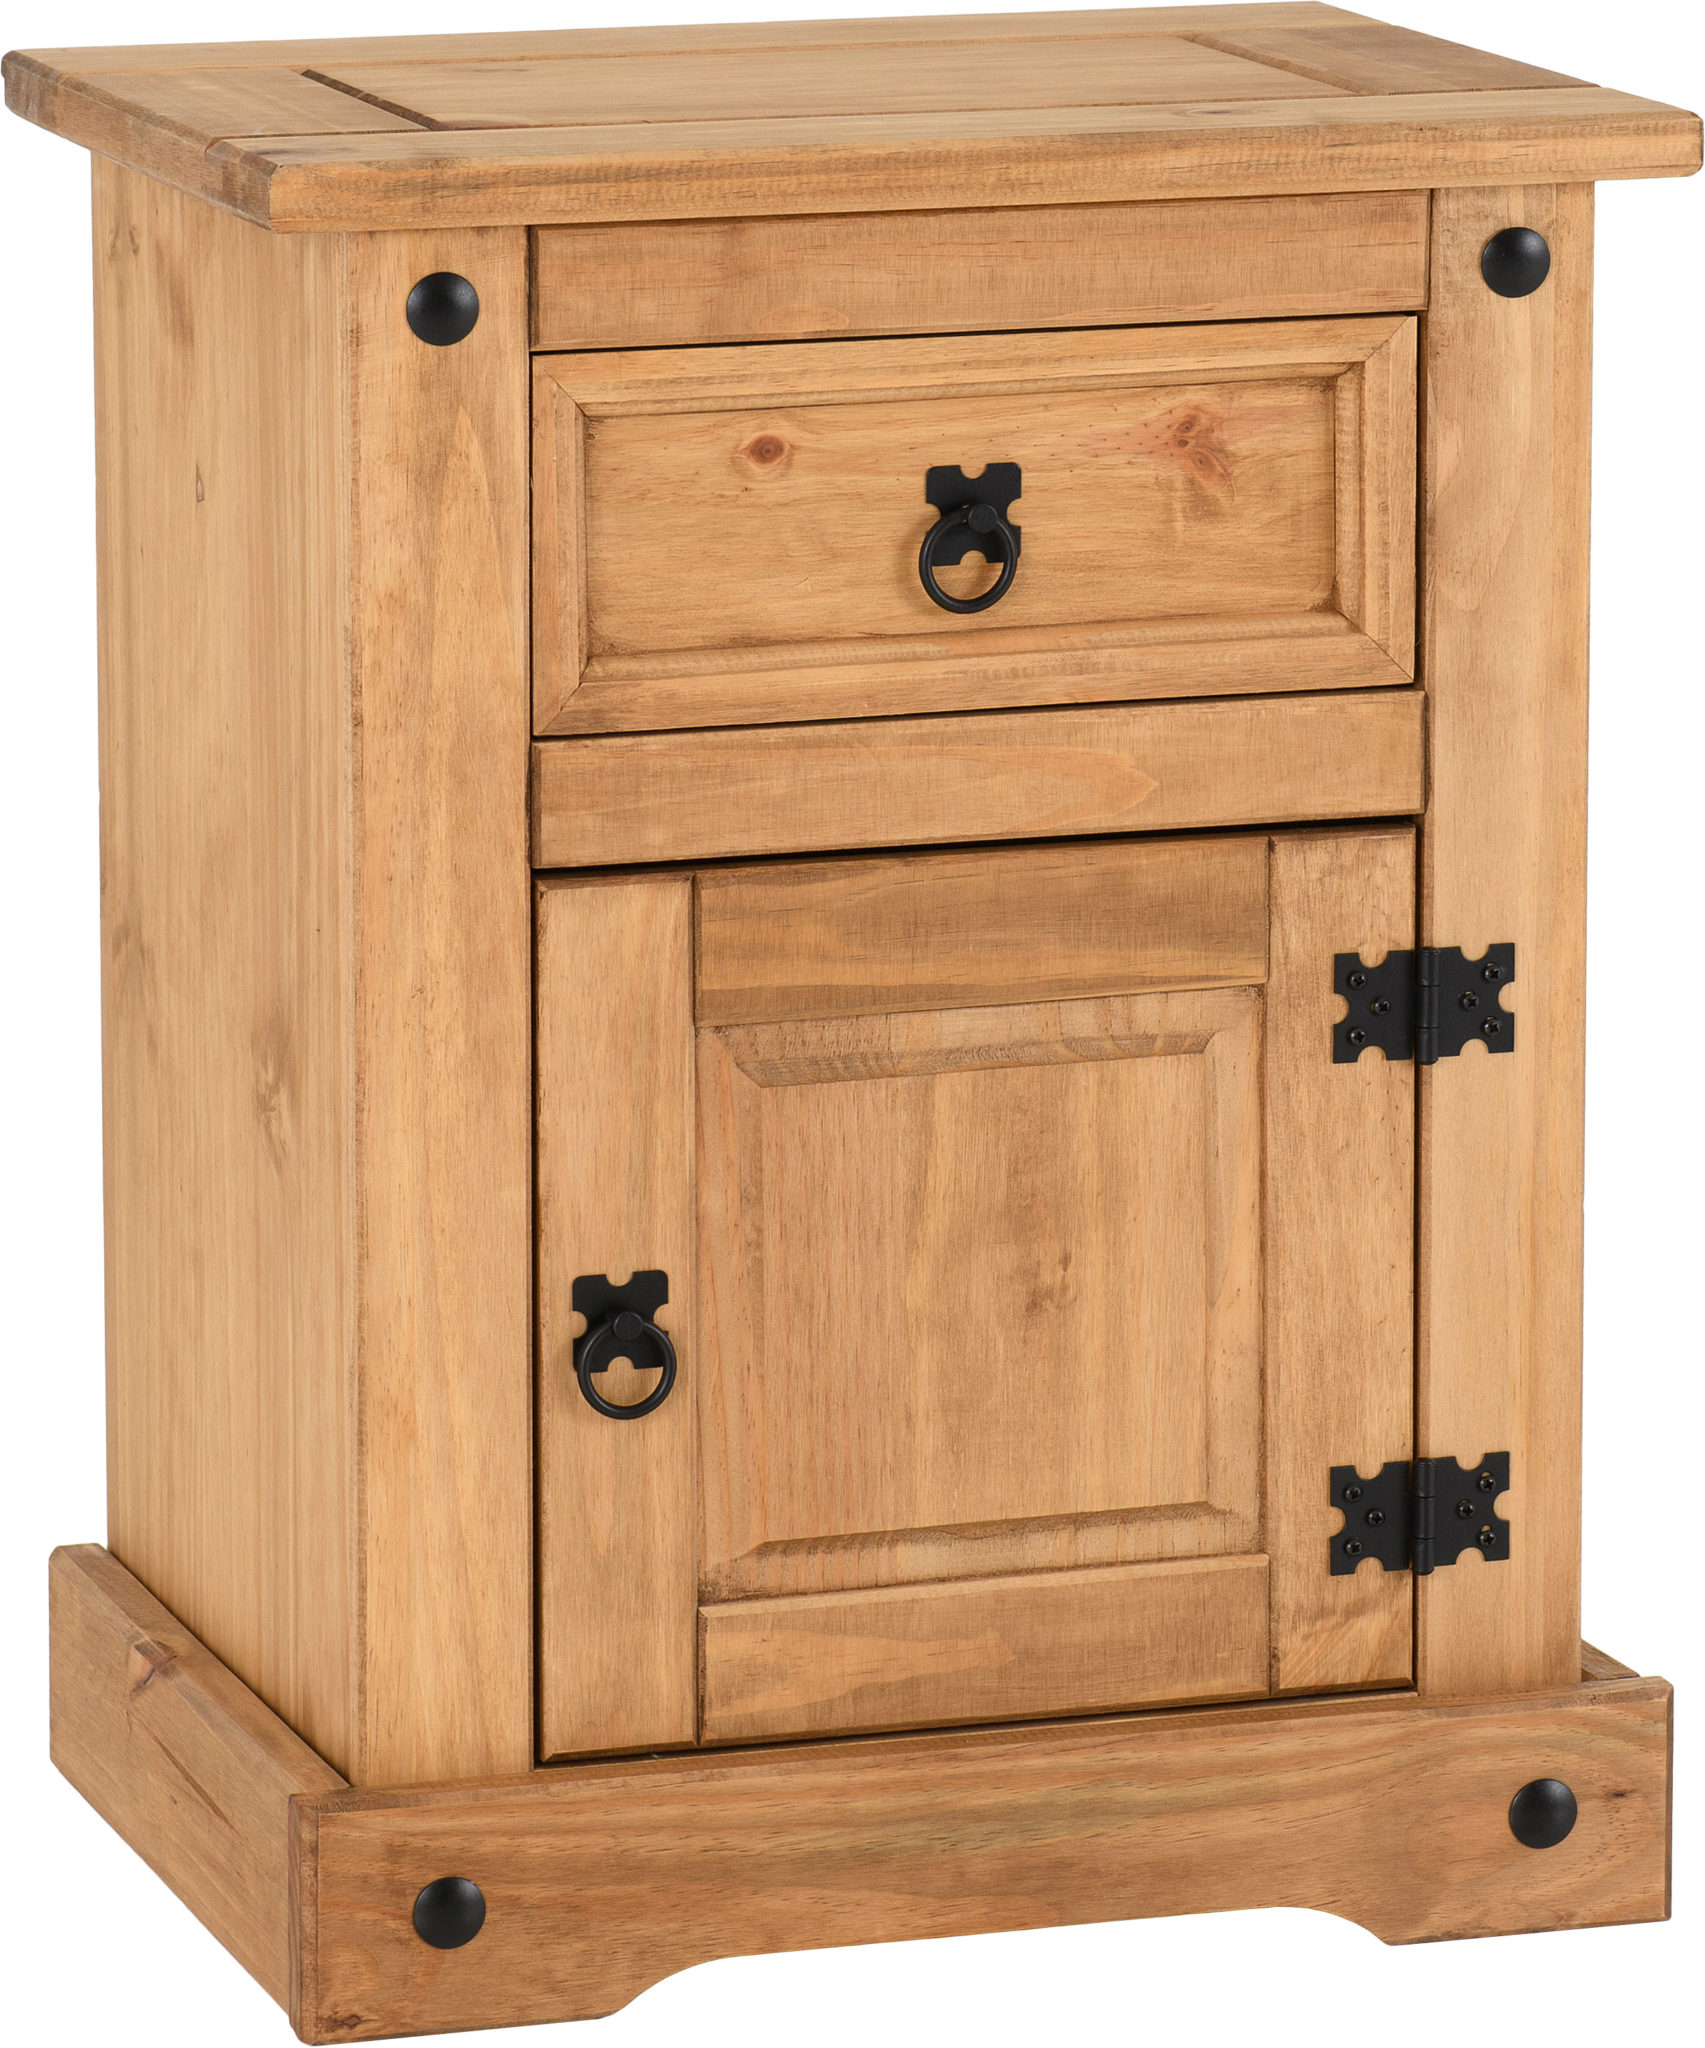 Grey Core Products Corona 1 Drawer Petite Distressed Waxed Pine Finish Bedside Cabinet W530 x D380 x H660mm 